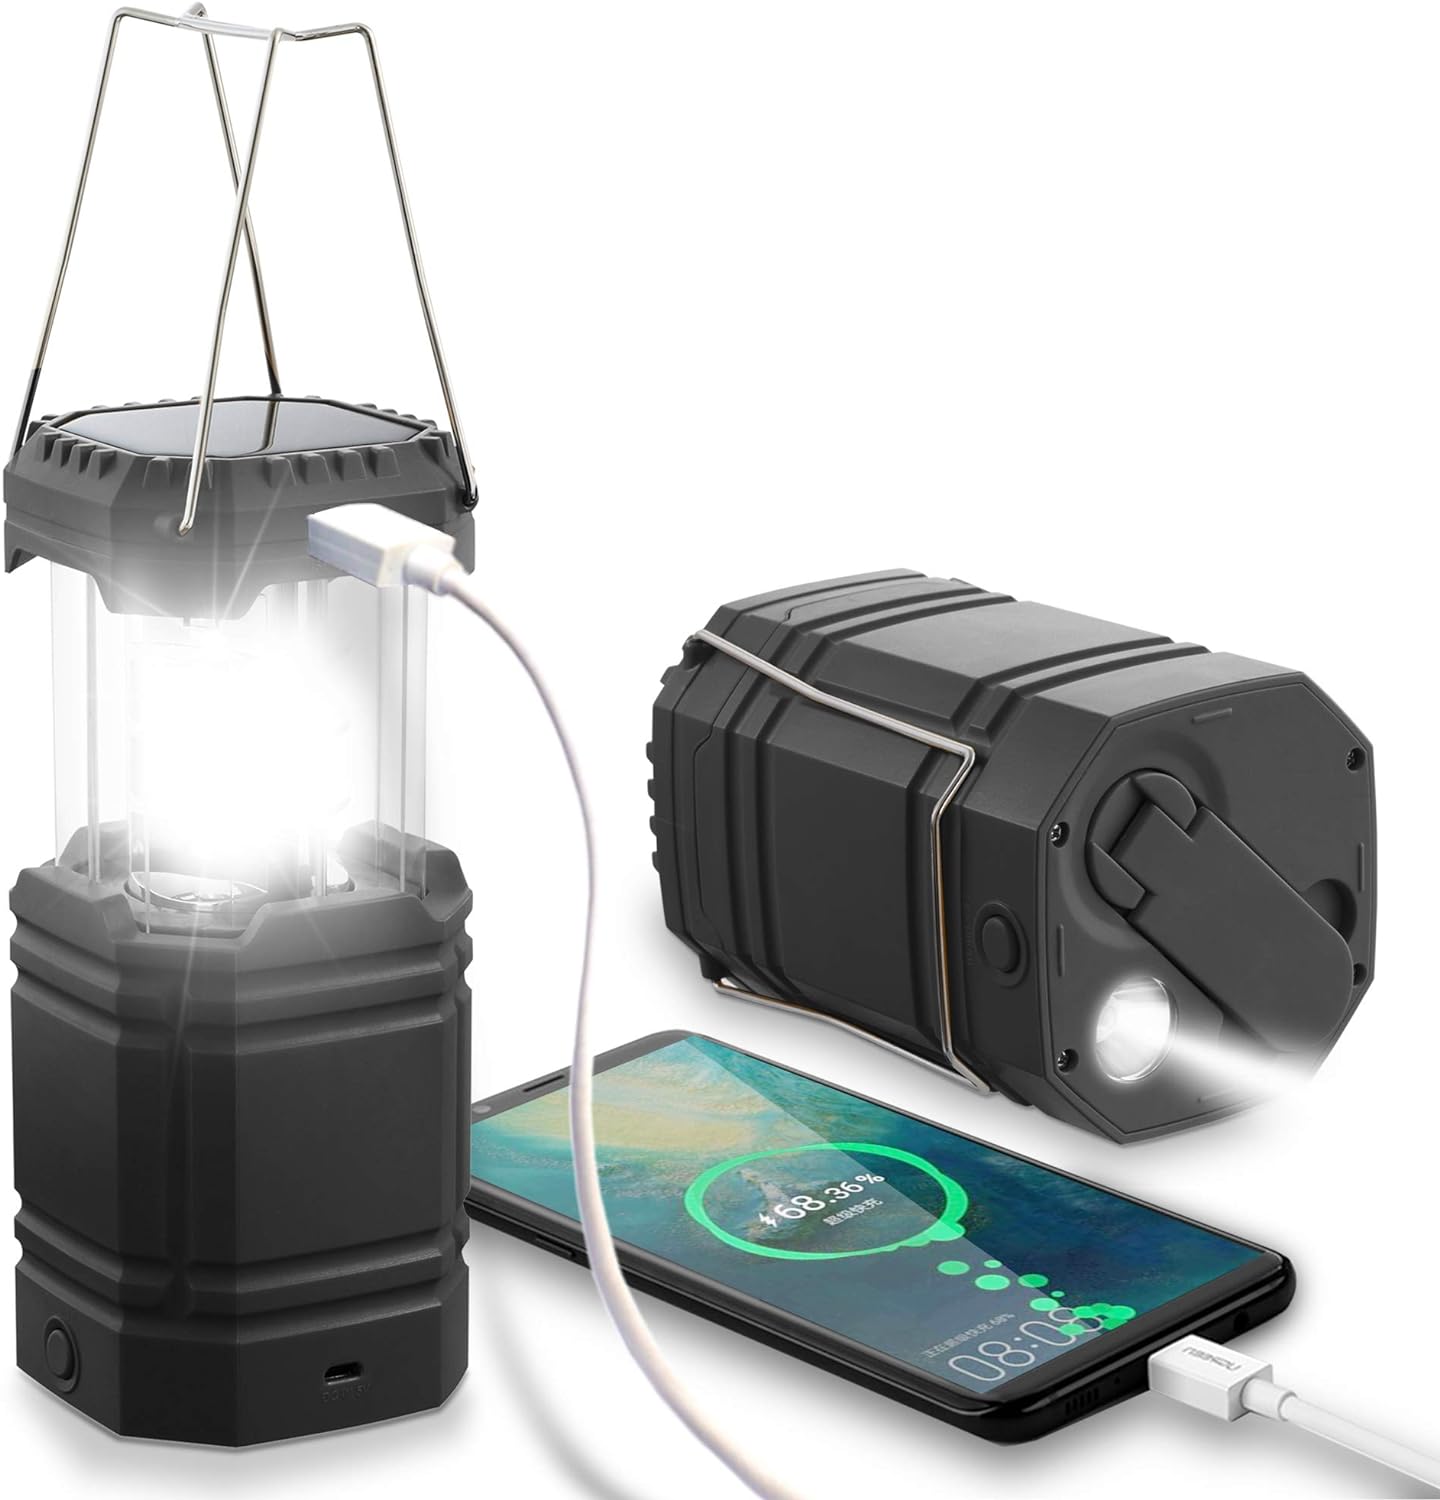 The Ultimate Solar Powered Survival LED Lantern